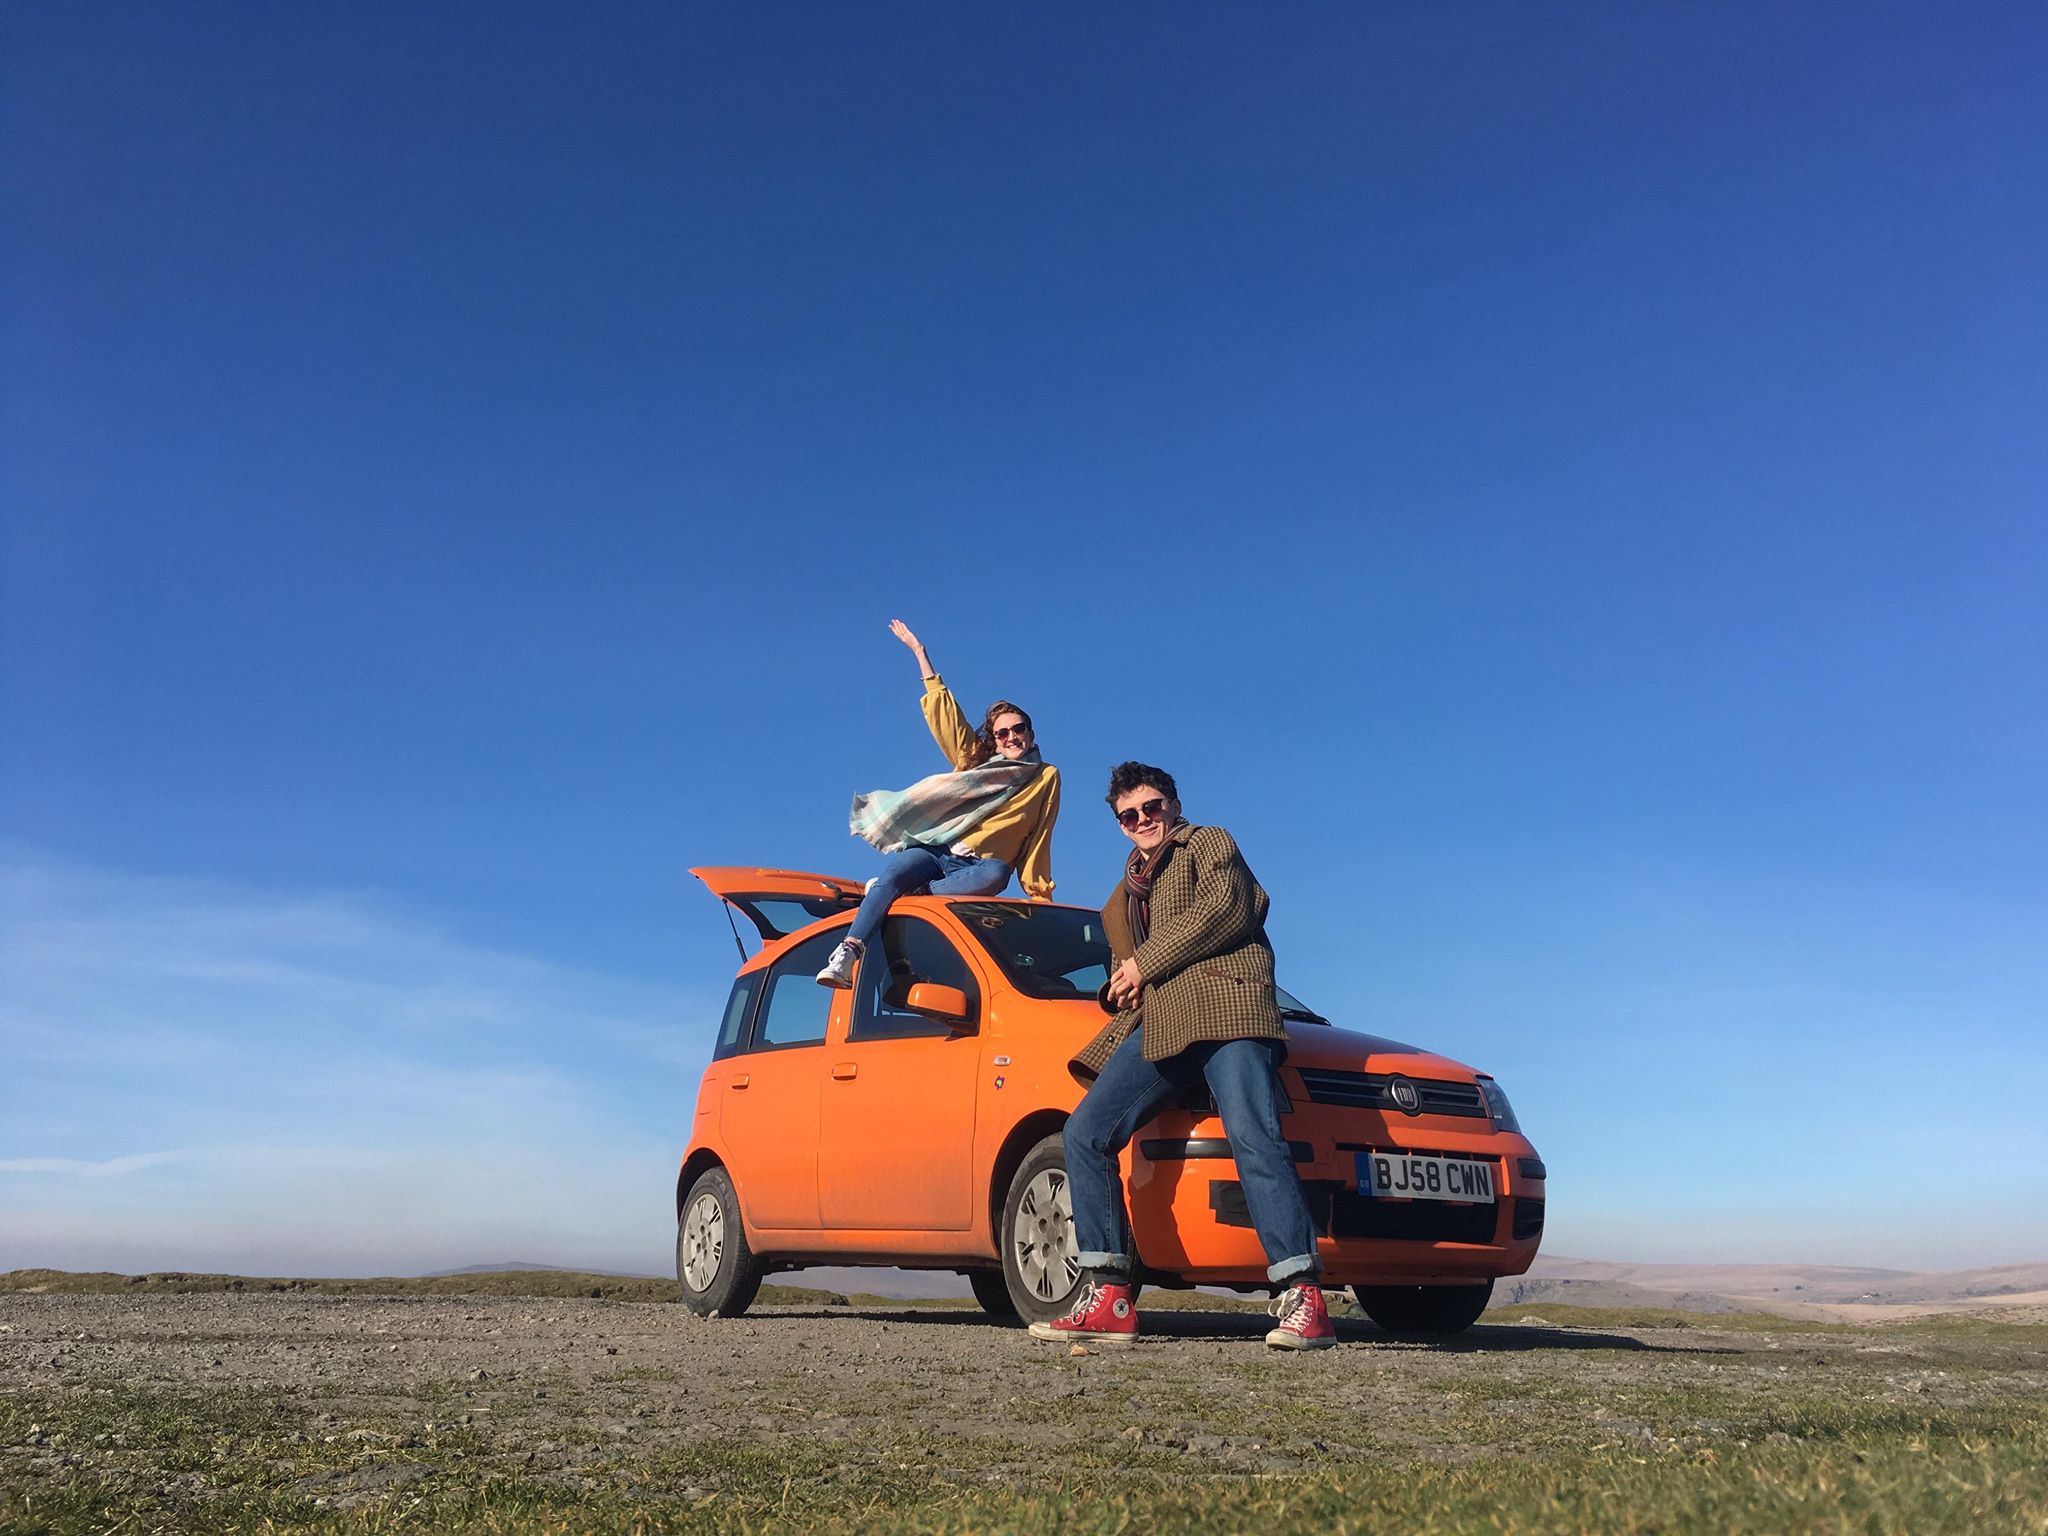 Lizzy and Matt posing on an orange car against a backdrop of blue skies and green grass.